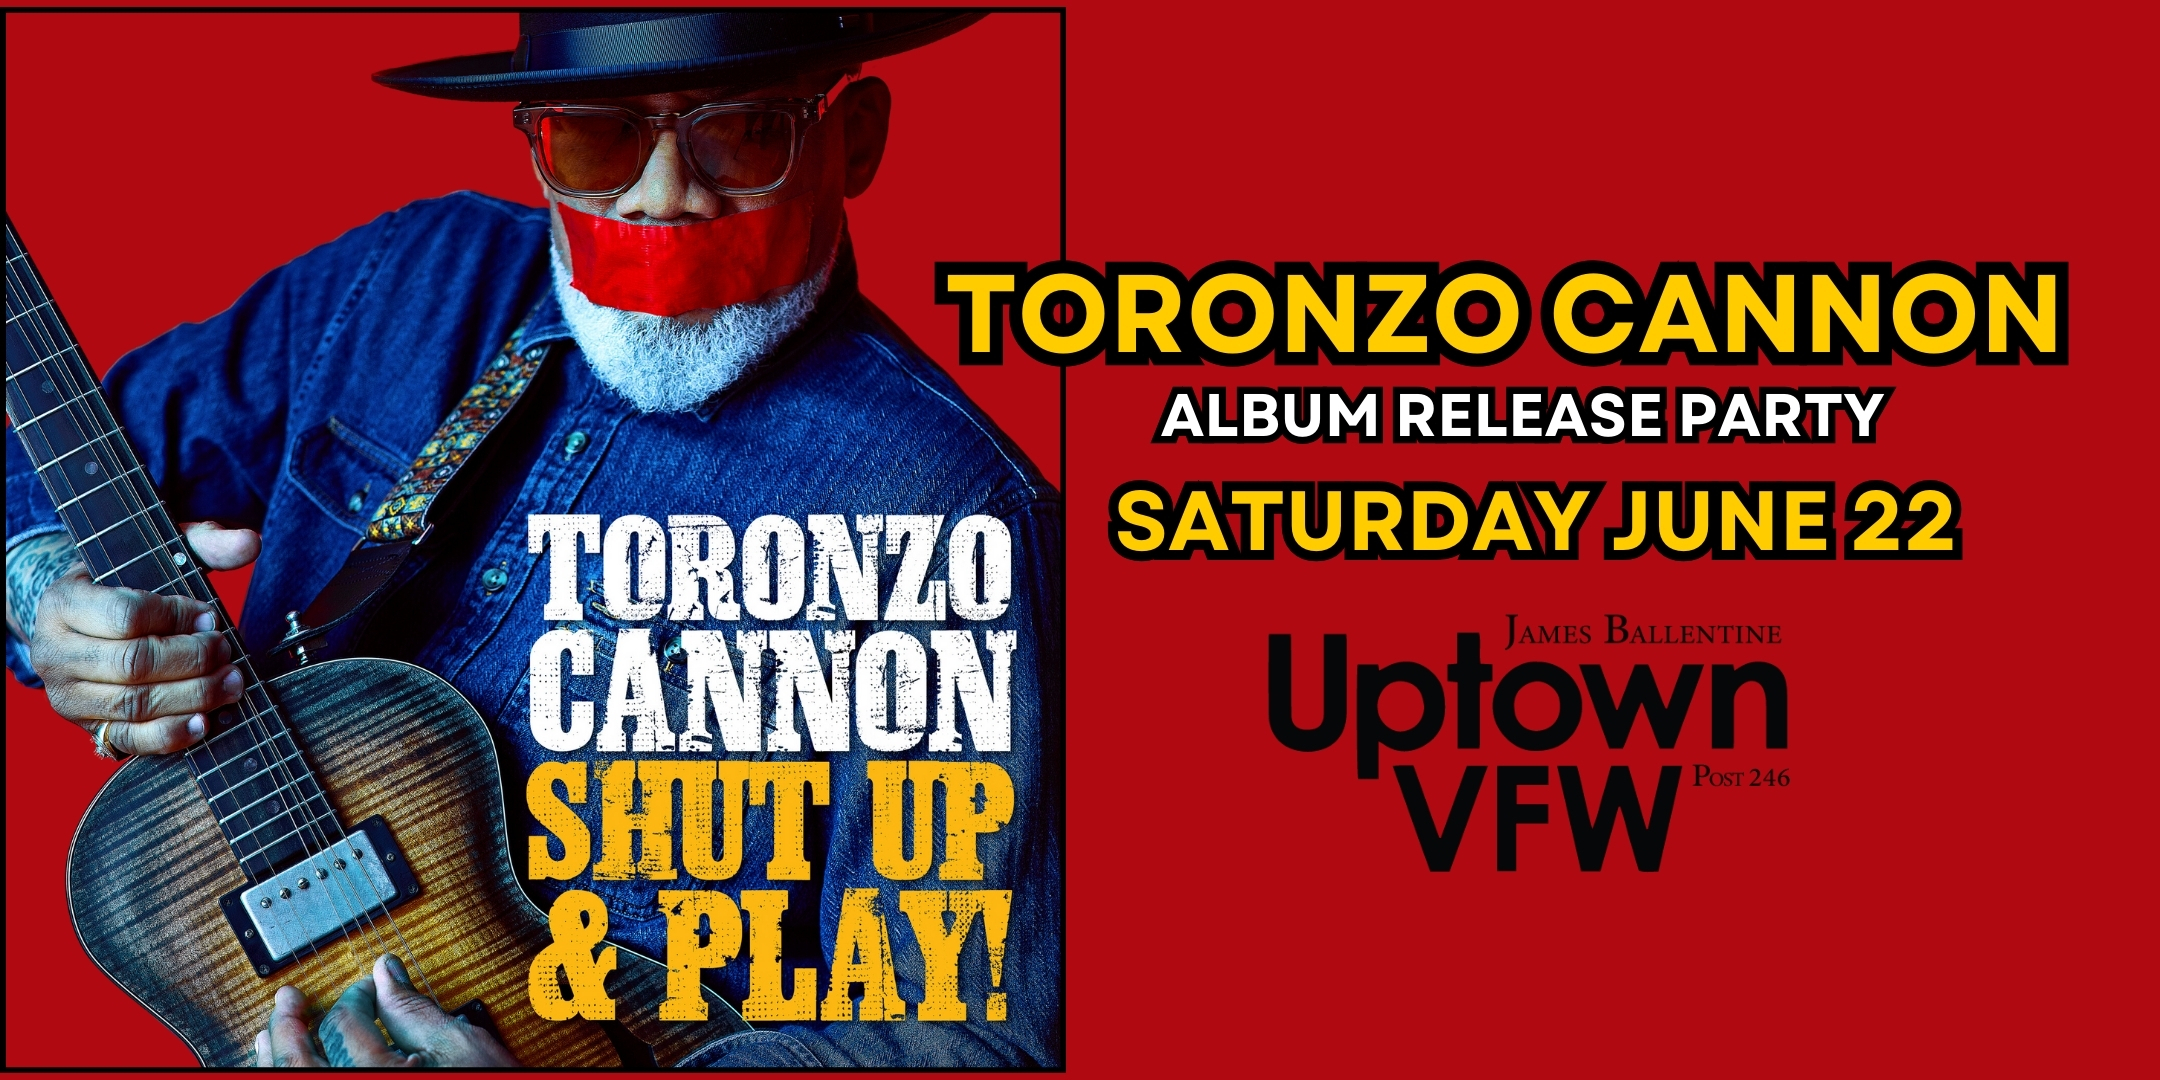 Toronzo Cannon “Shut Up & Play” Album Release Party Saturday, June 22 James Ballentine "Uptown" VFW Post 246 Doors 7:30pm :: Music 8:00pm :: 21+ GA $25 ADV / $30 DOS NO REFUNDS Tickets On Sale Now